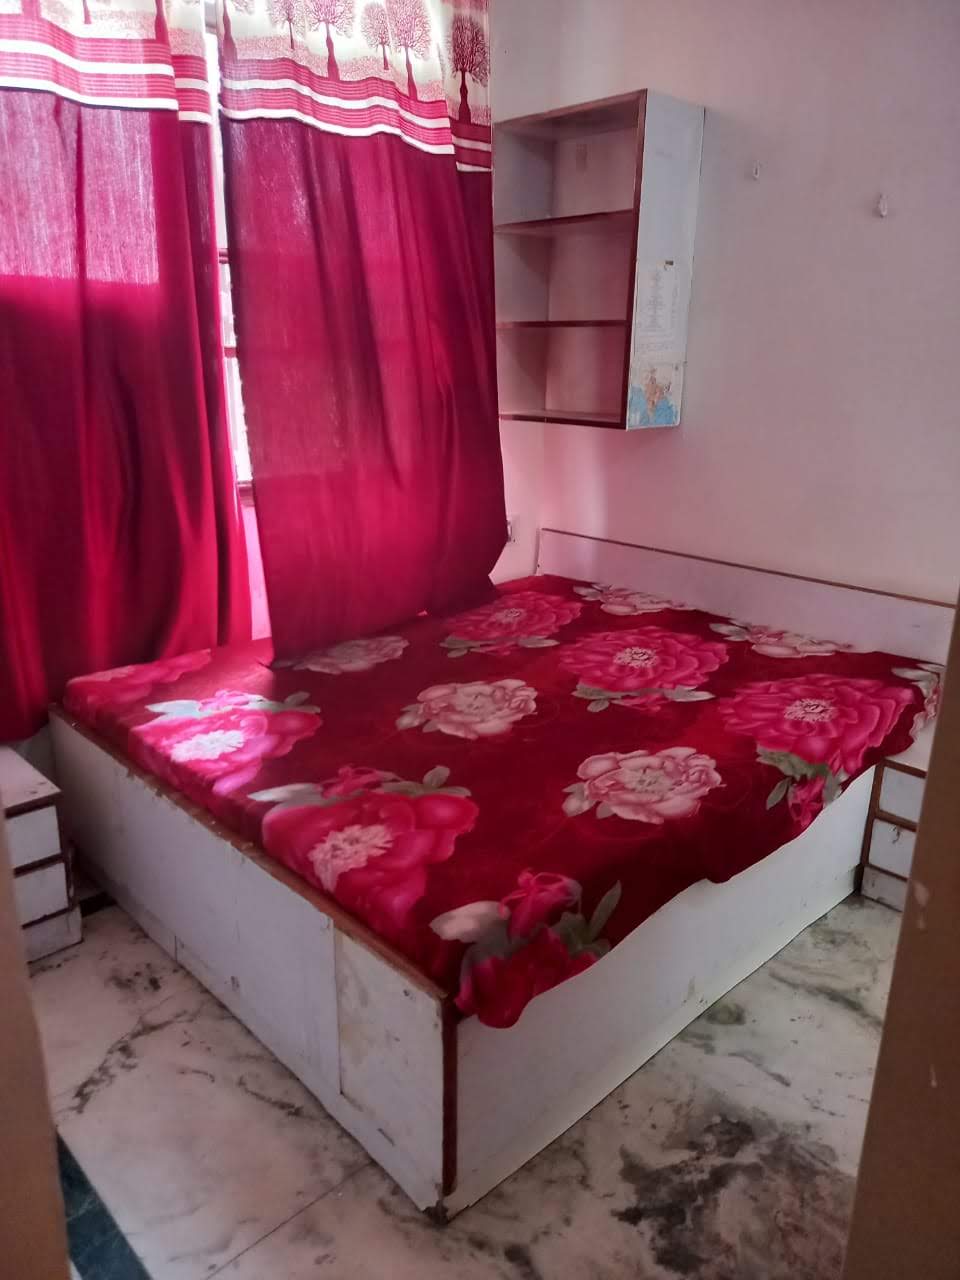 A well maintained licensed pg for girls with a experience of 5 year. we provide  fully furnished rooms with separate bed and Elmira, Book shelf, Wi -Fi, TV, fridge, cooler, ac , ro water, water cooler system. for security 24hr CCTV cameras and security guard is provided. three times  delicious food Real EstatePaying Guest HostelCentral DelhiKarol Bagh